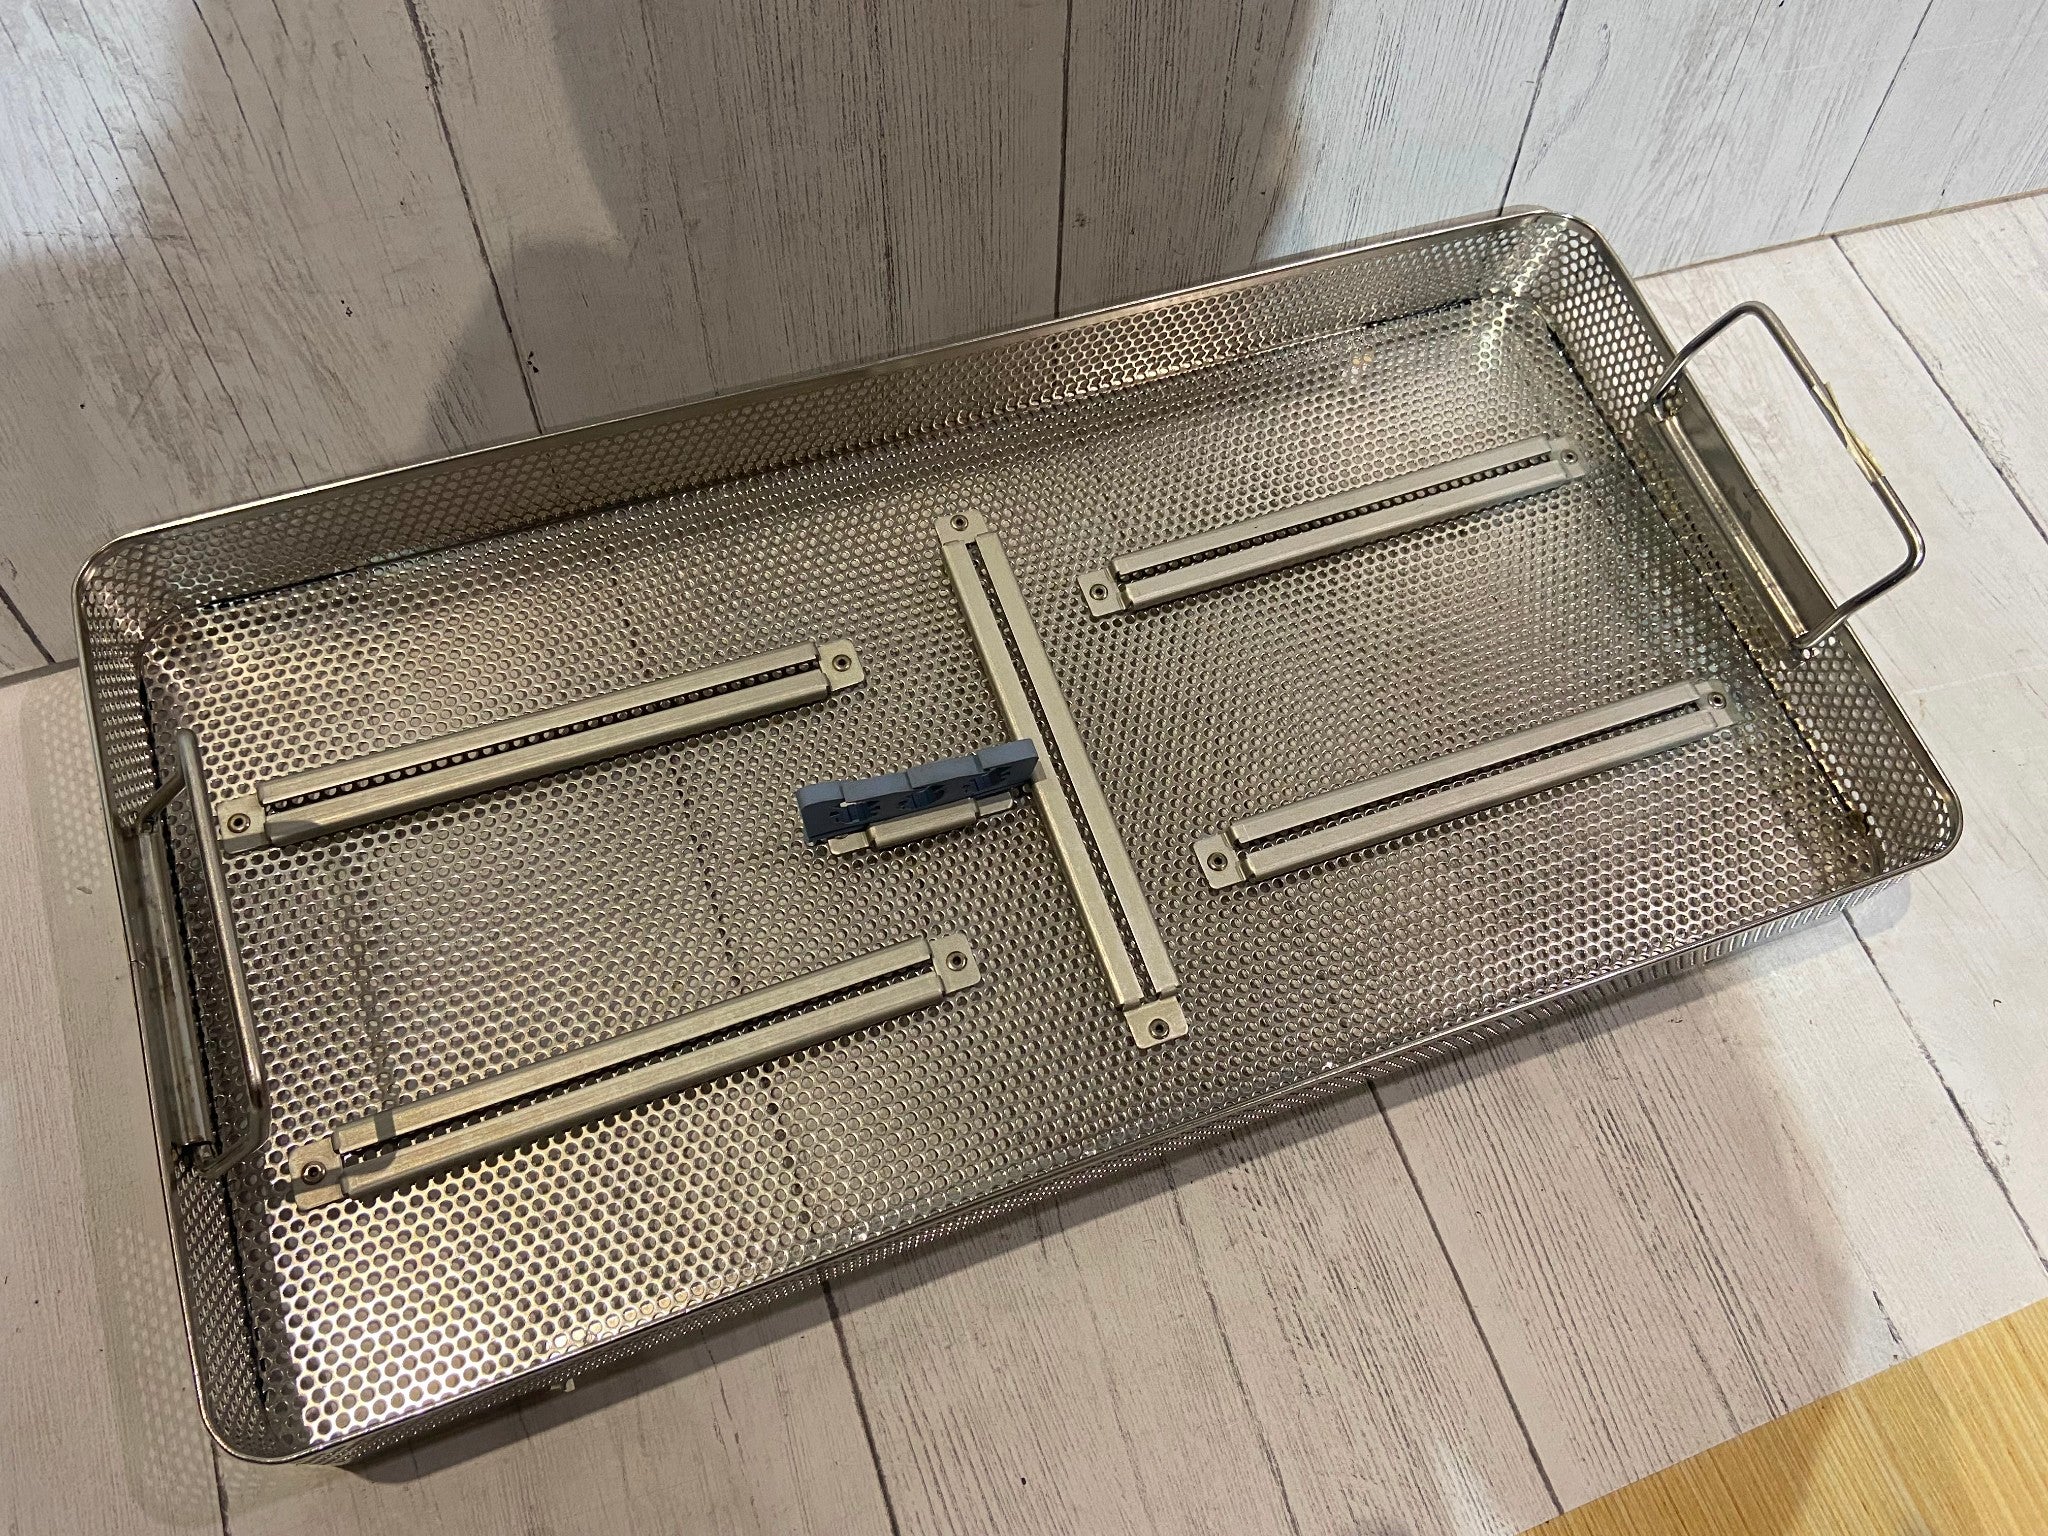 Unbranded Stainless Steel Sterilization Tray 20.5"x10.75"x2" DIAGNOSTIC ULTRASOUND MACHINES FOR SALE